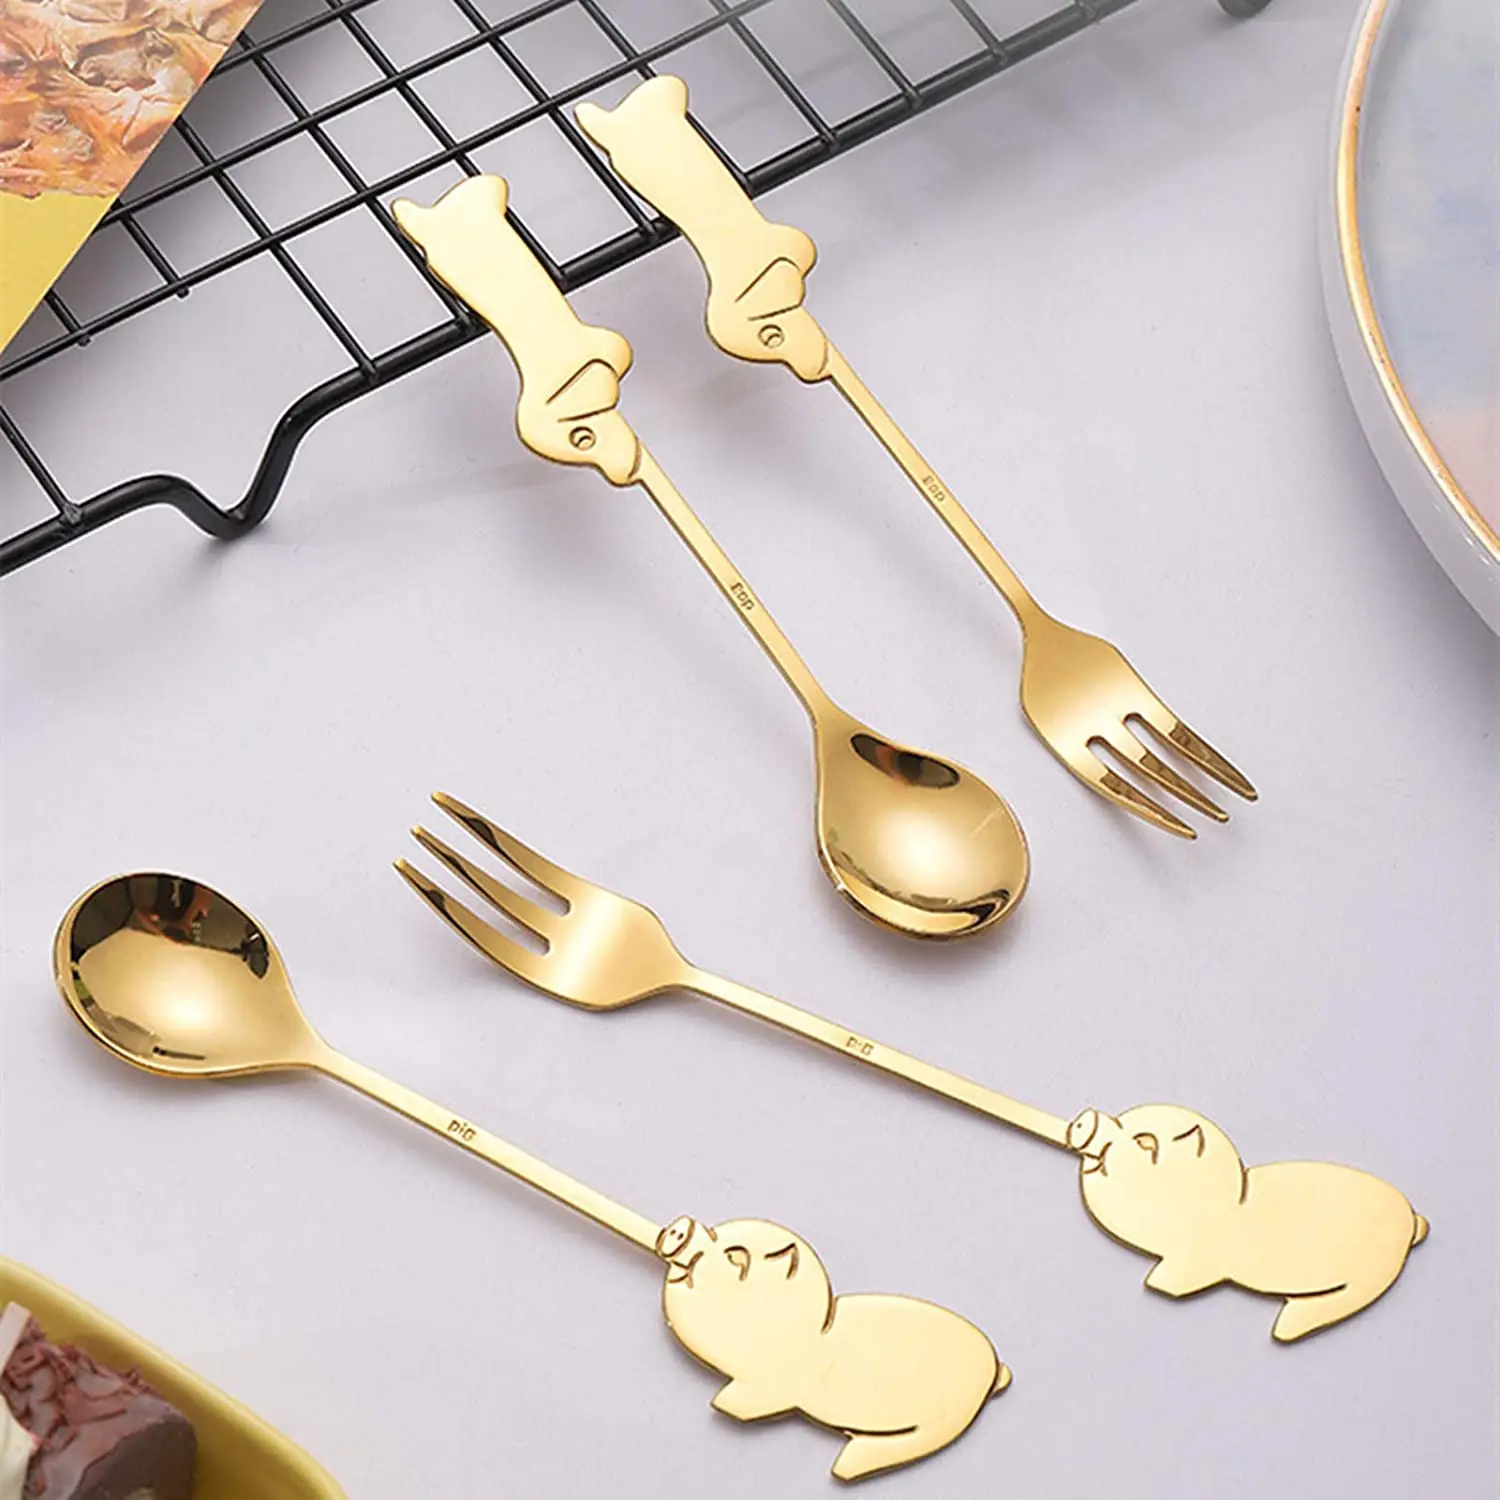 4PCS Dessert Spoons Snack Forks Stainless Steel Animals Pig Dog Creative Coffee Spoon Honey Stirring Mixing Spoons Fork Set